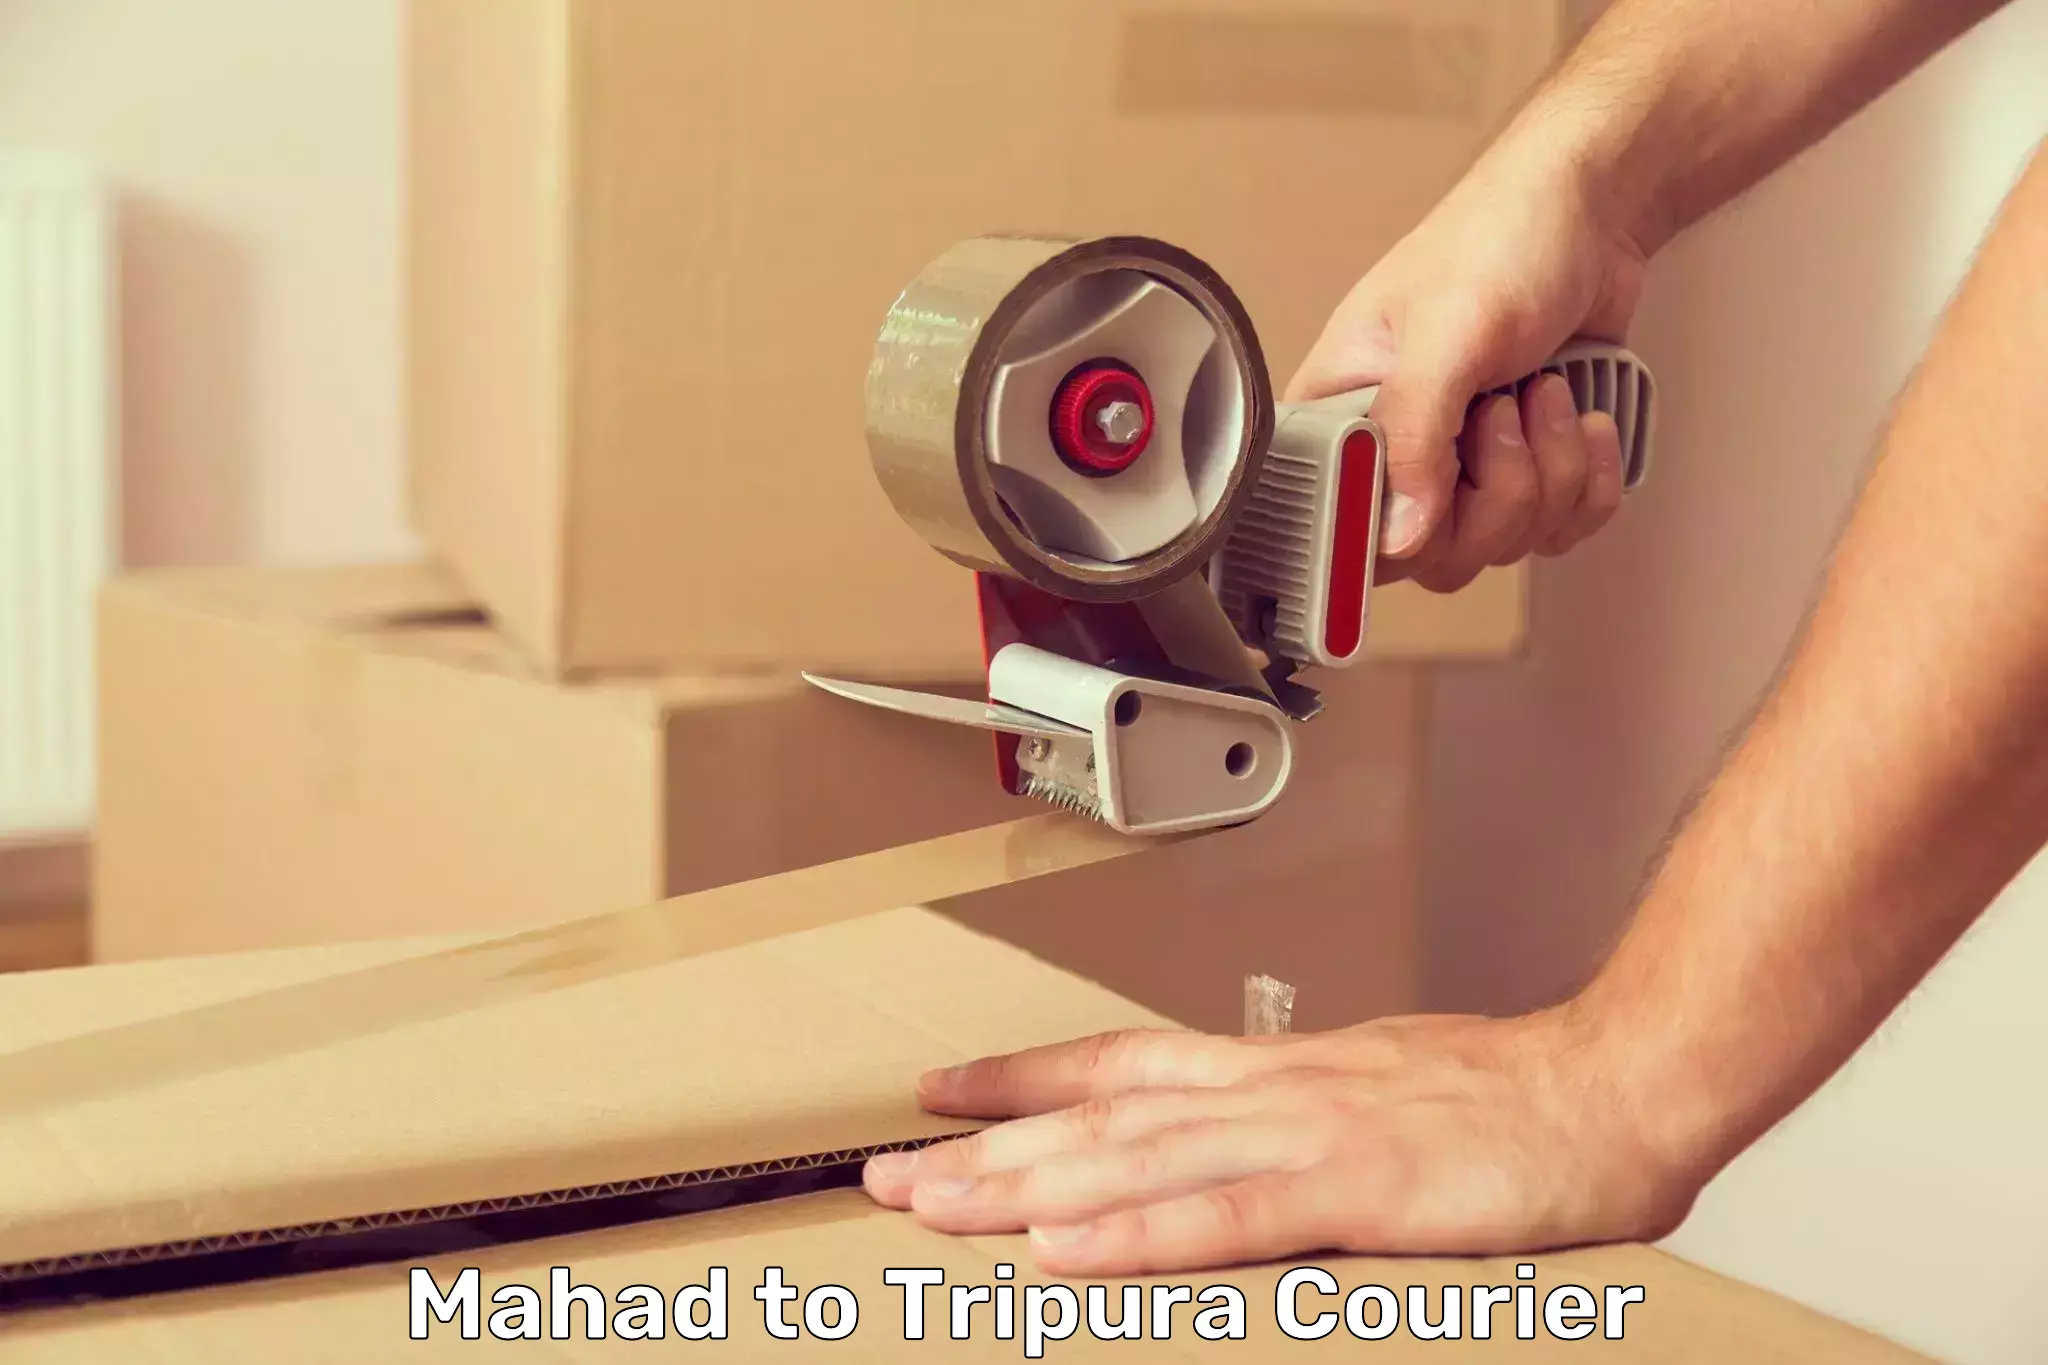 Cargo delivery service Mahad to Udaipur Tripura